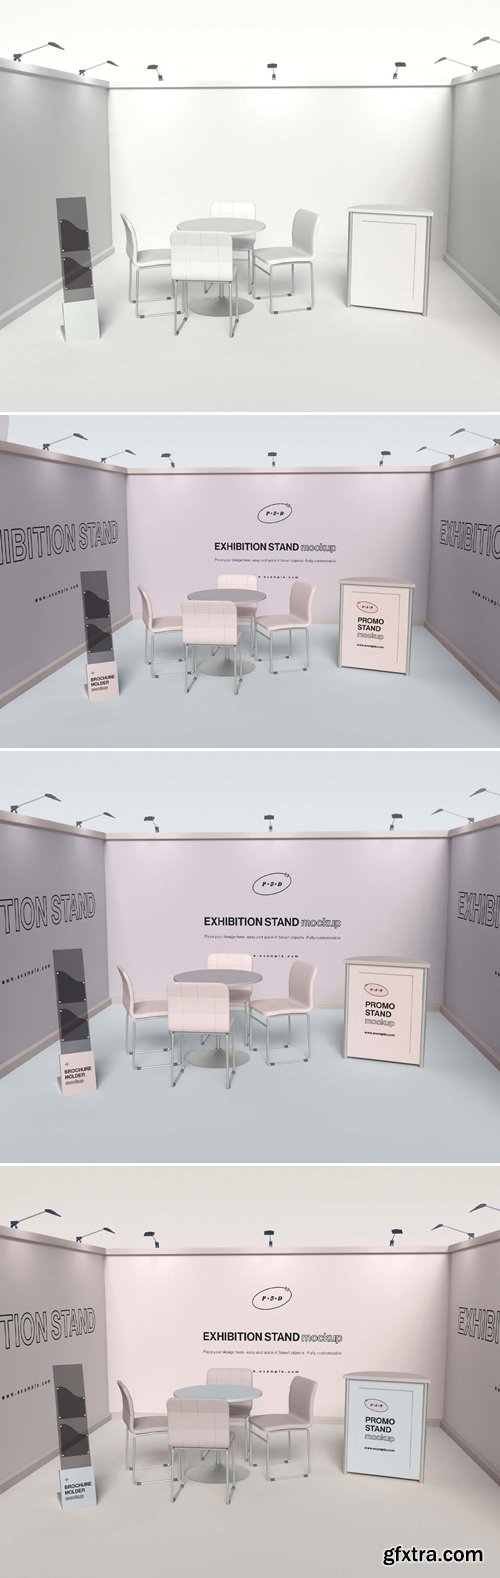 Exhibition Stand Mockup